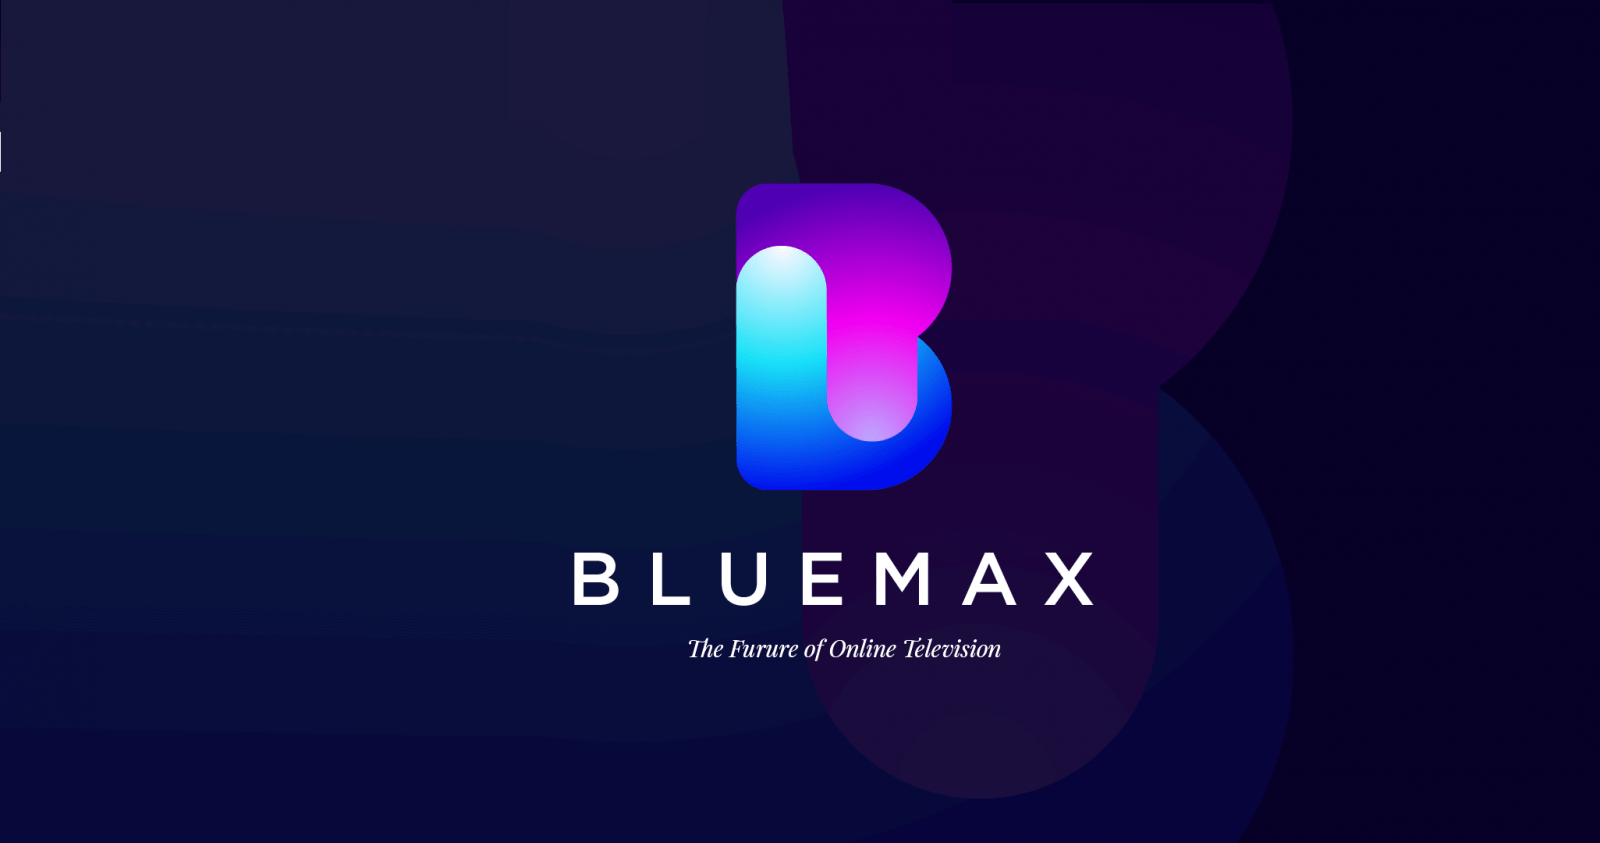 Bluemax IPTV: Review, Features, and Setup Guide